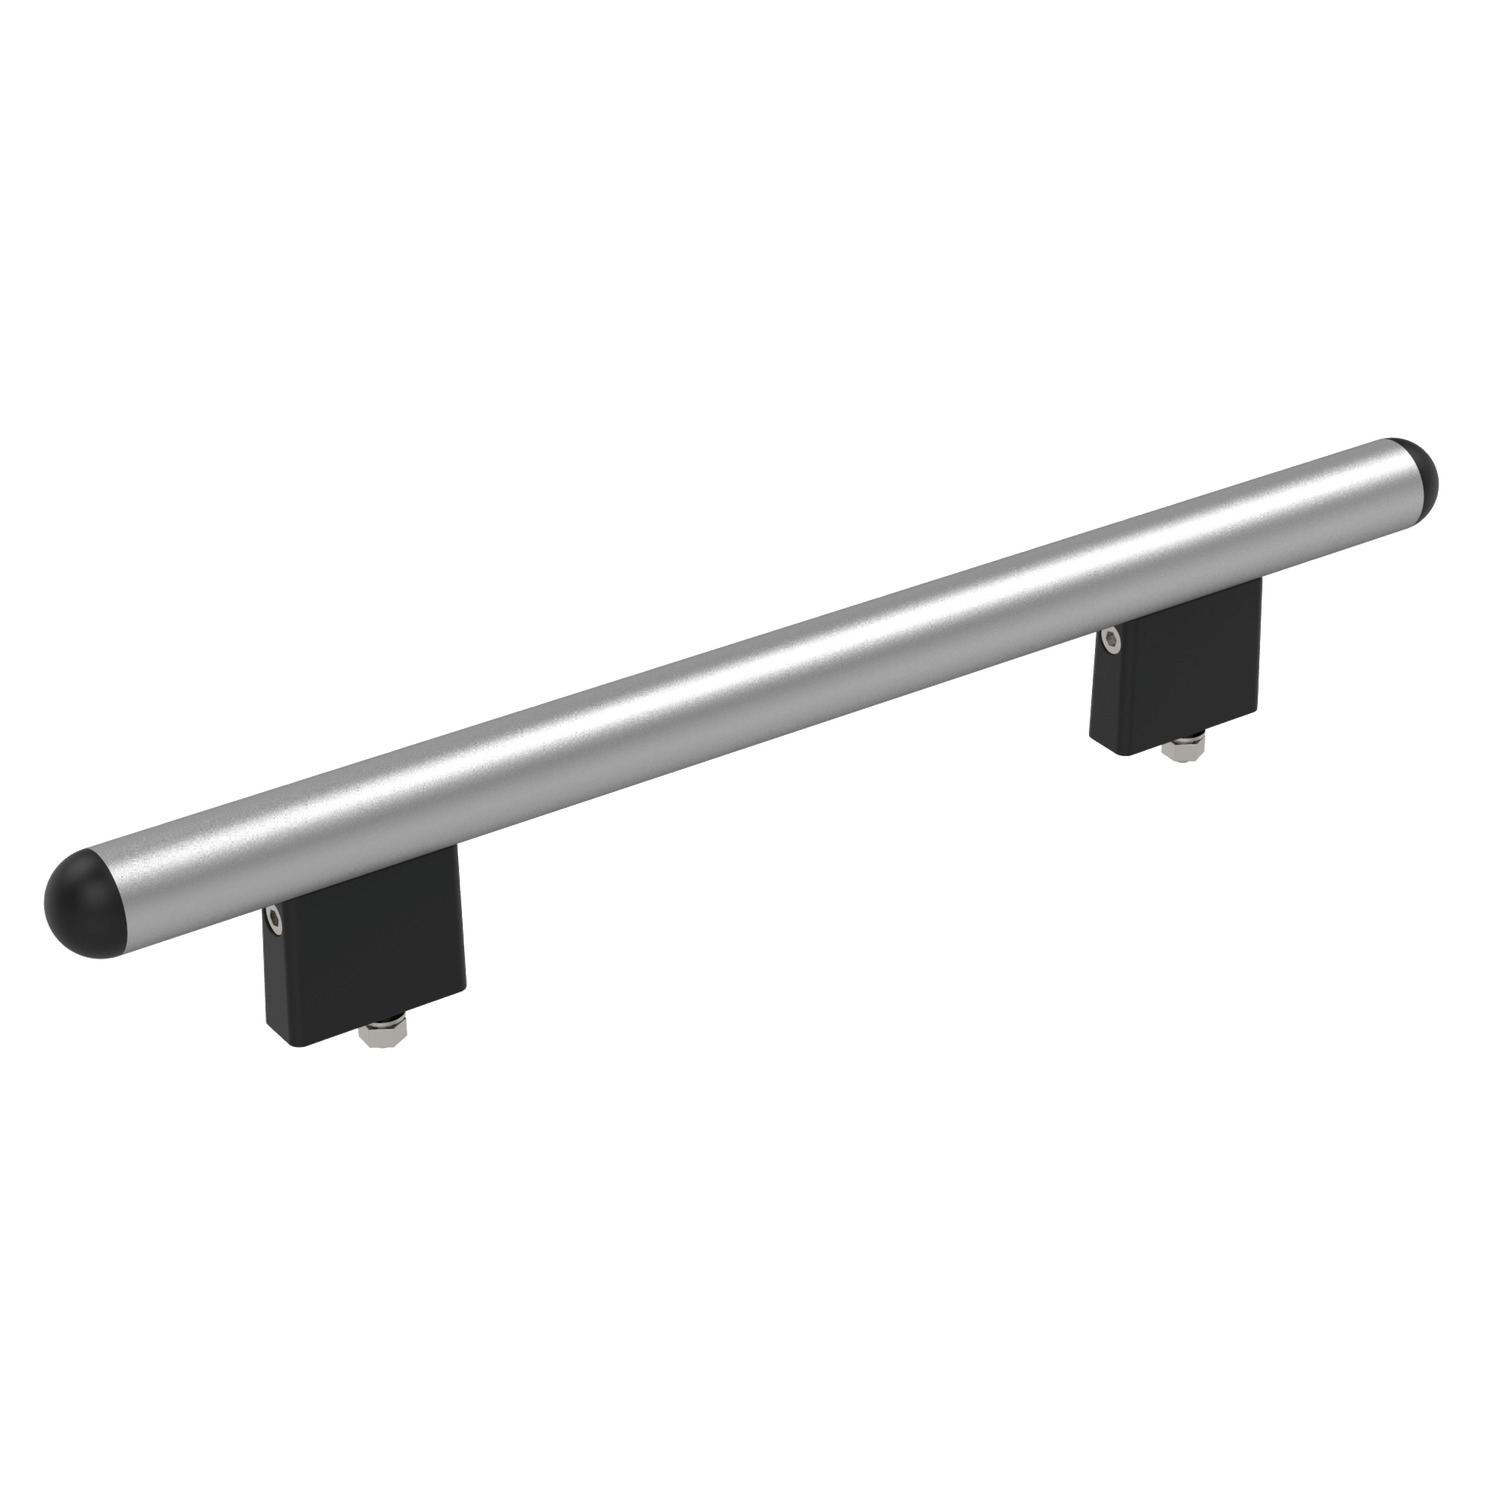 Pull Handles - Heavy Duty A heavy duty tubular handle from stainless steel tube with aluminium connection shanks. Minimum stress resistance 1000N.